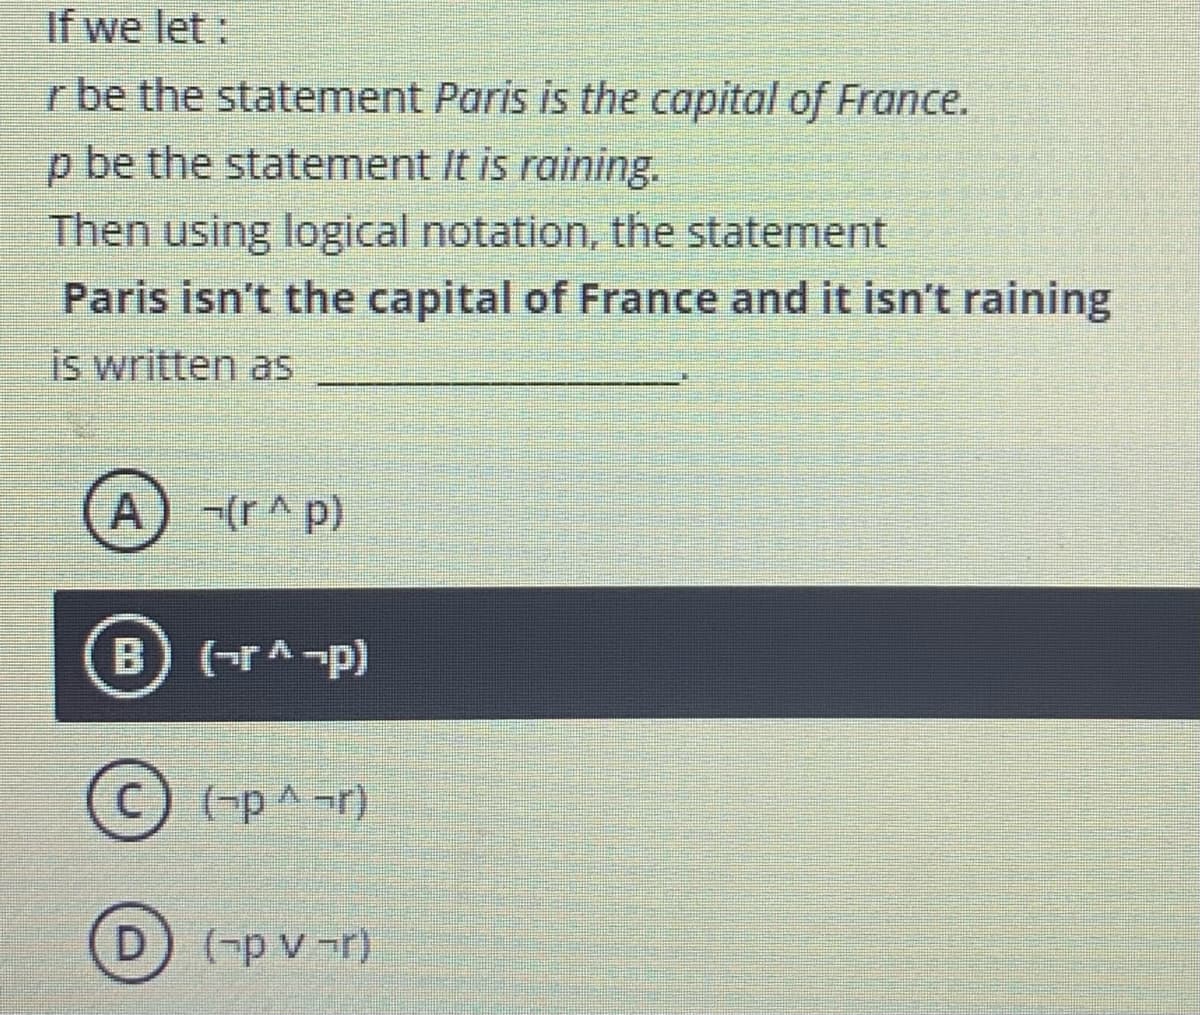 If we let:
r be the statement Paris is the capital of France.
p be the statement It is raining.
Then using logical notation, the statement
Paris isn't the capital of France and it isn't raining
is written as
A
-(r^ p)
B) (-rA-p)
C) (-p^-r)
D) (-p v -r)
